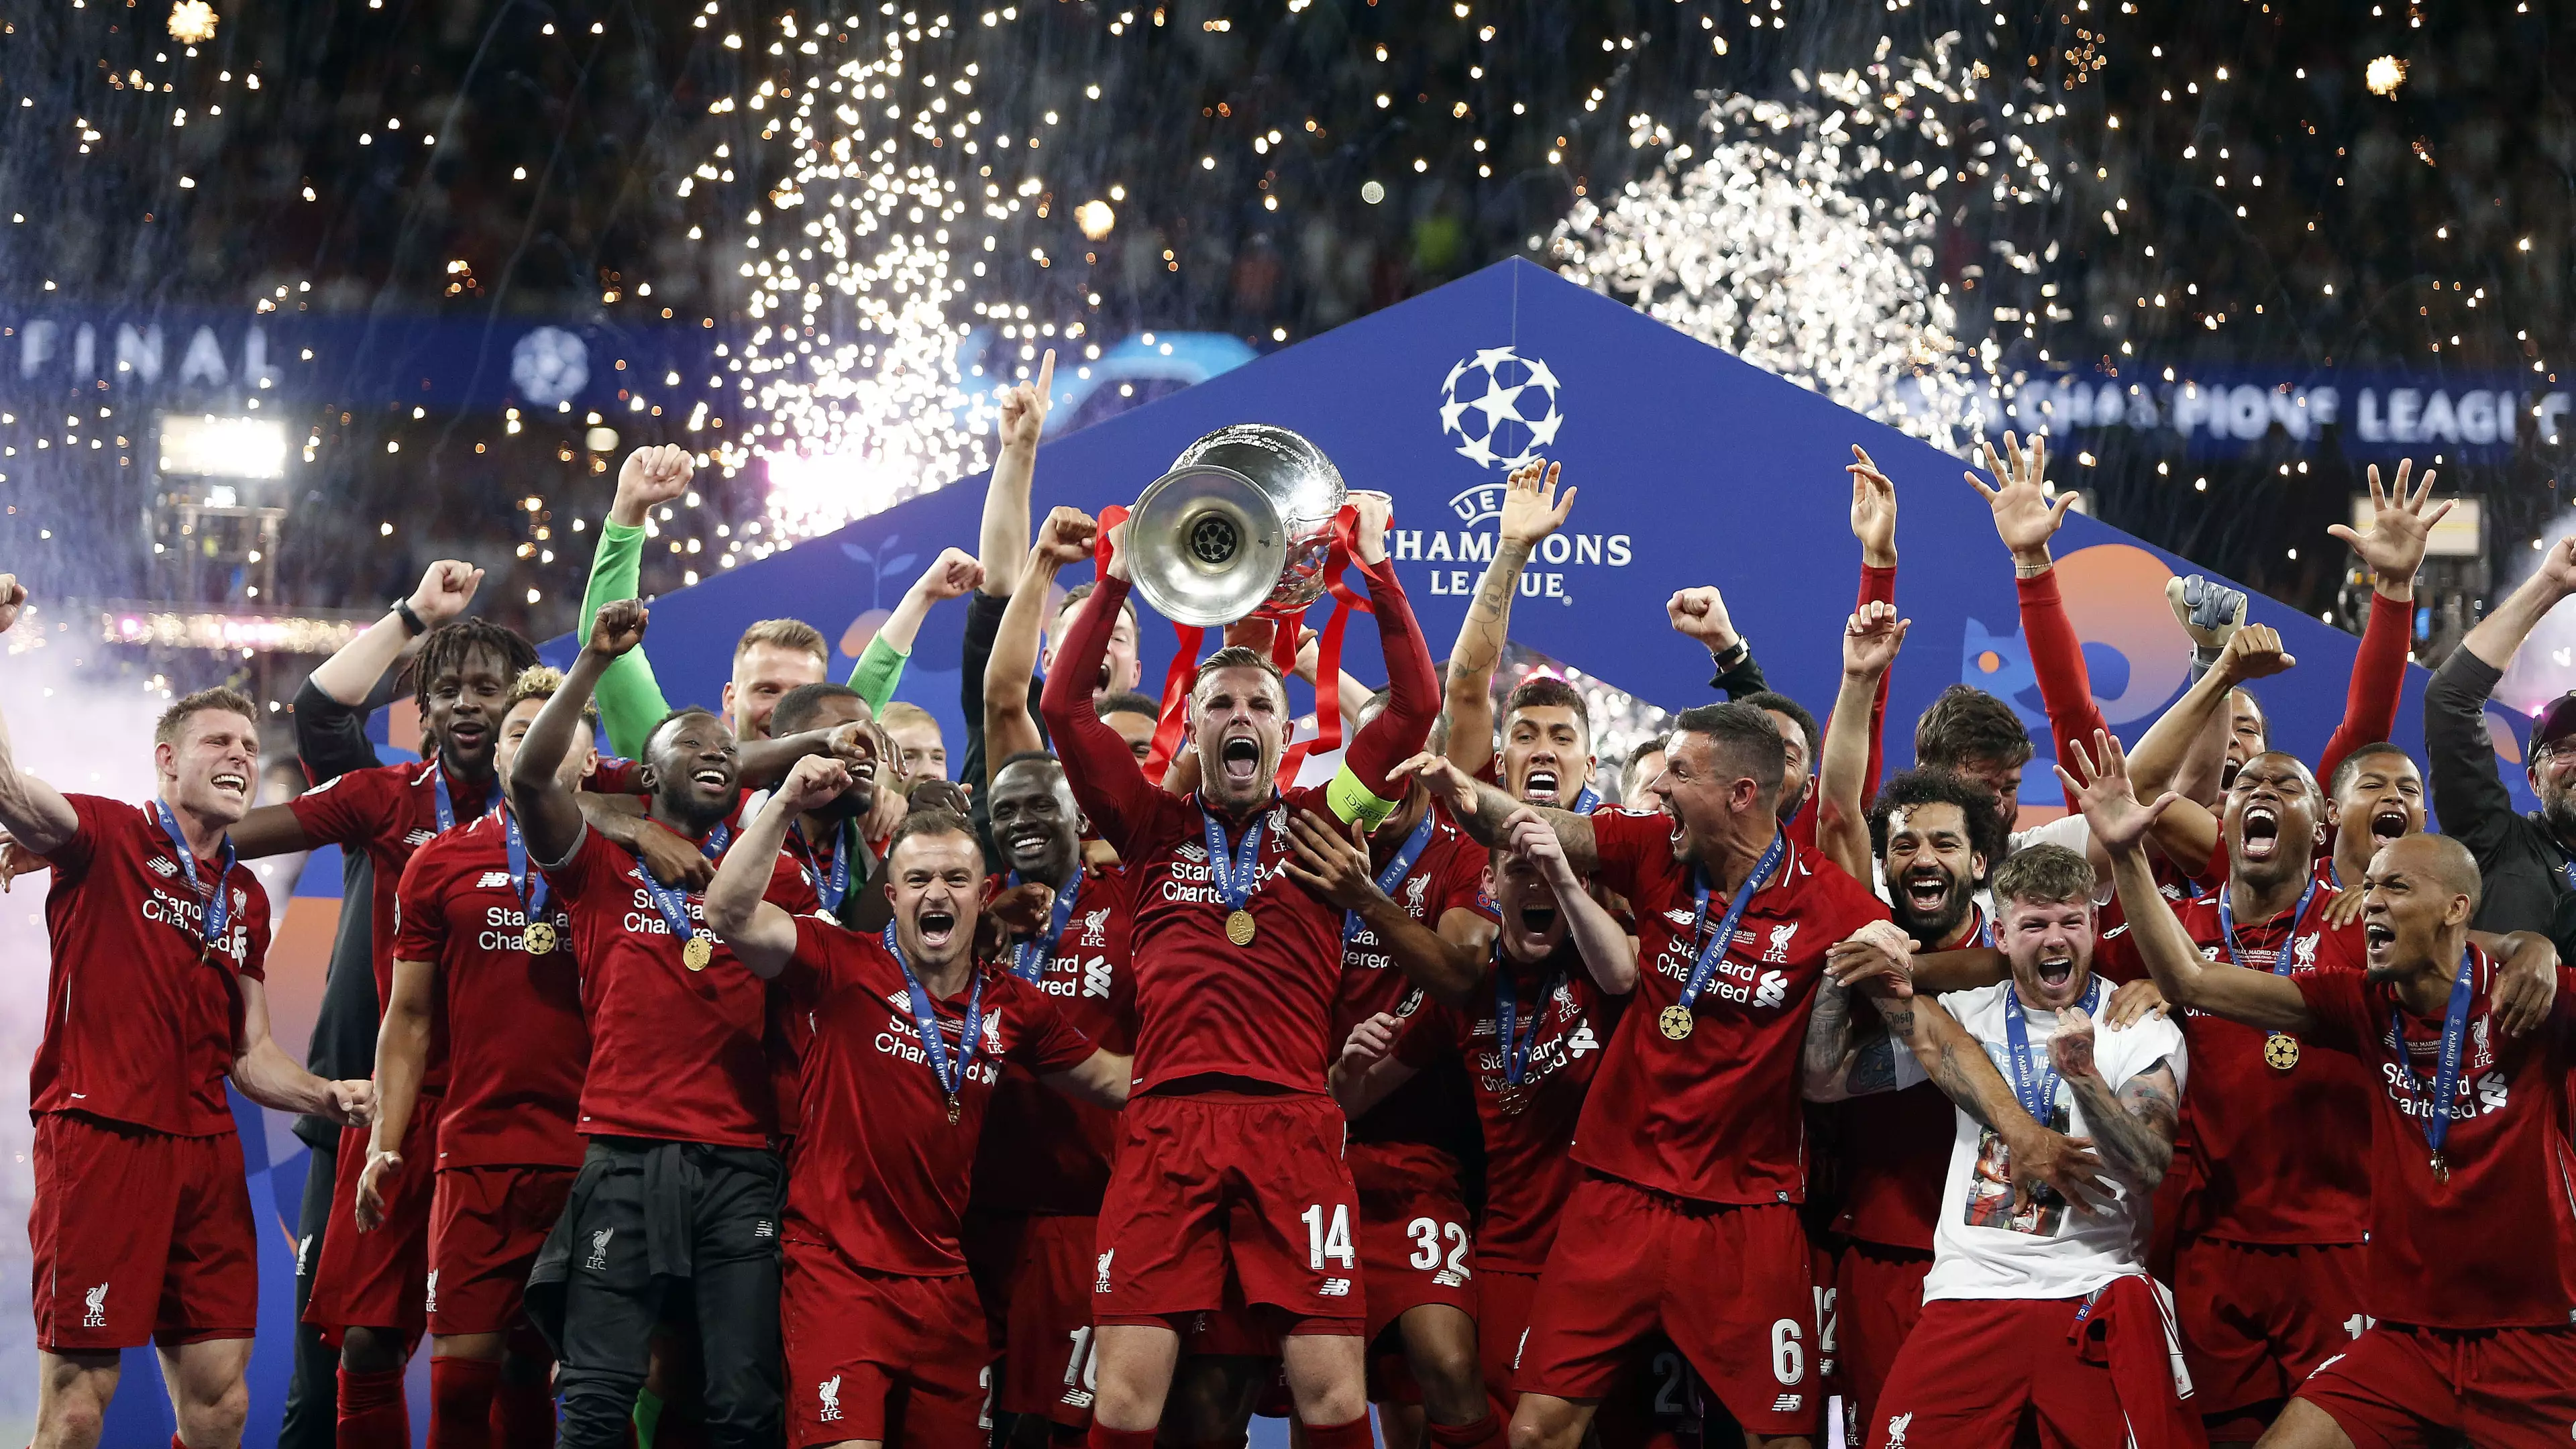 Incredible Proposal For Deciding Champions League Winner If Campaign Is Finished